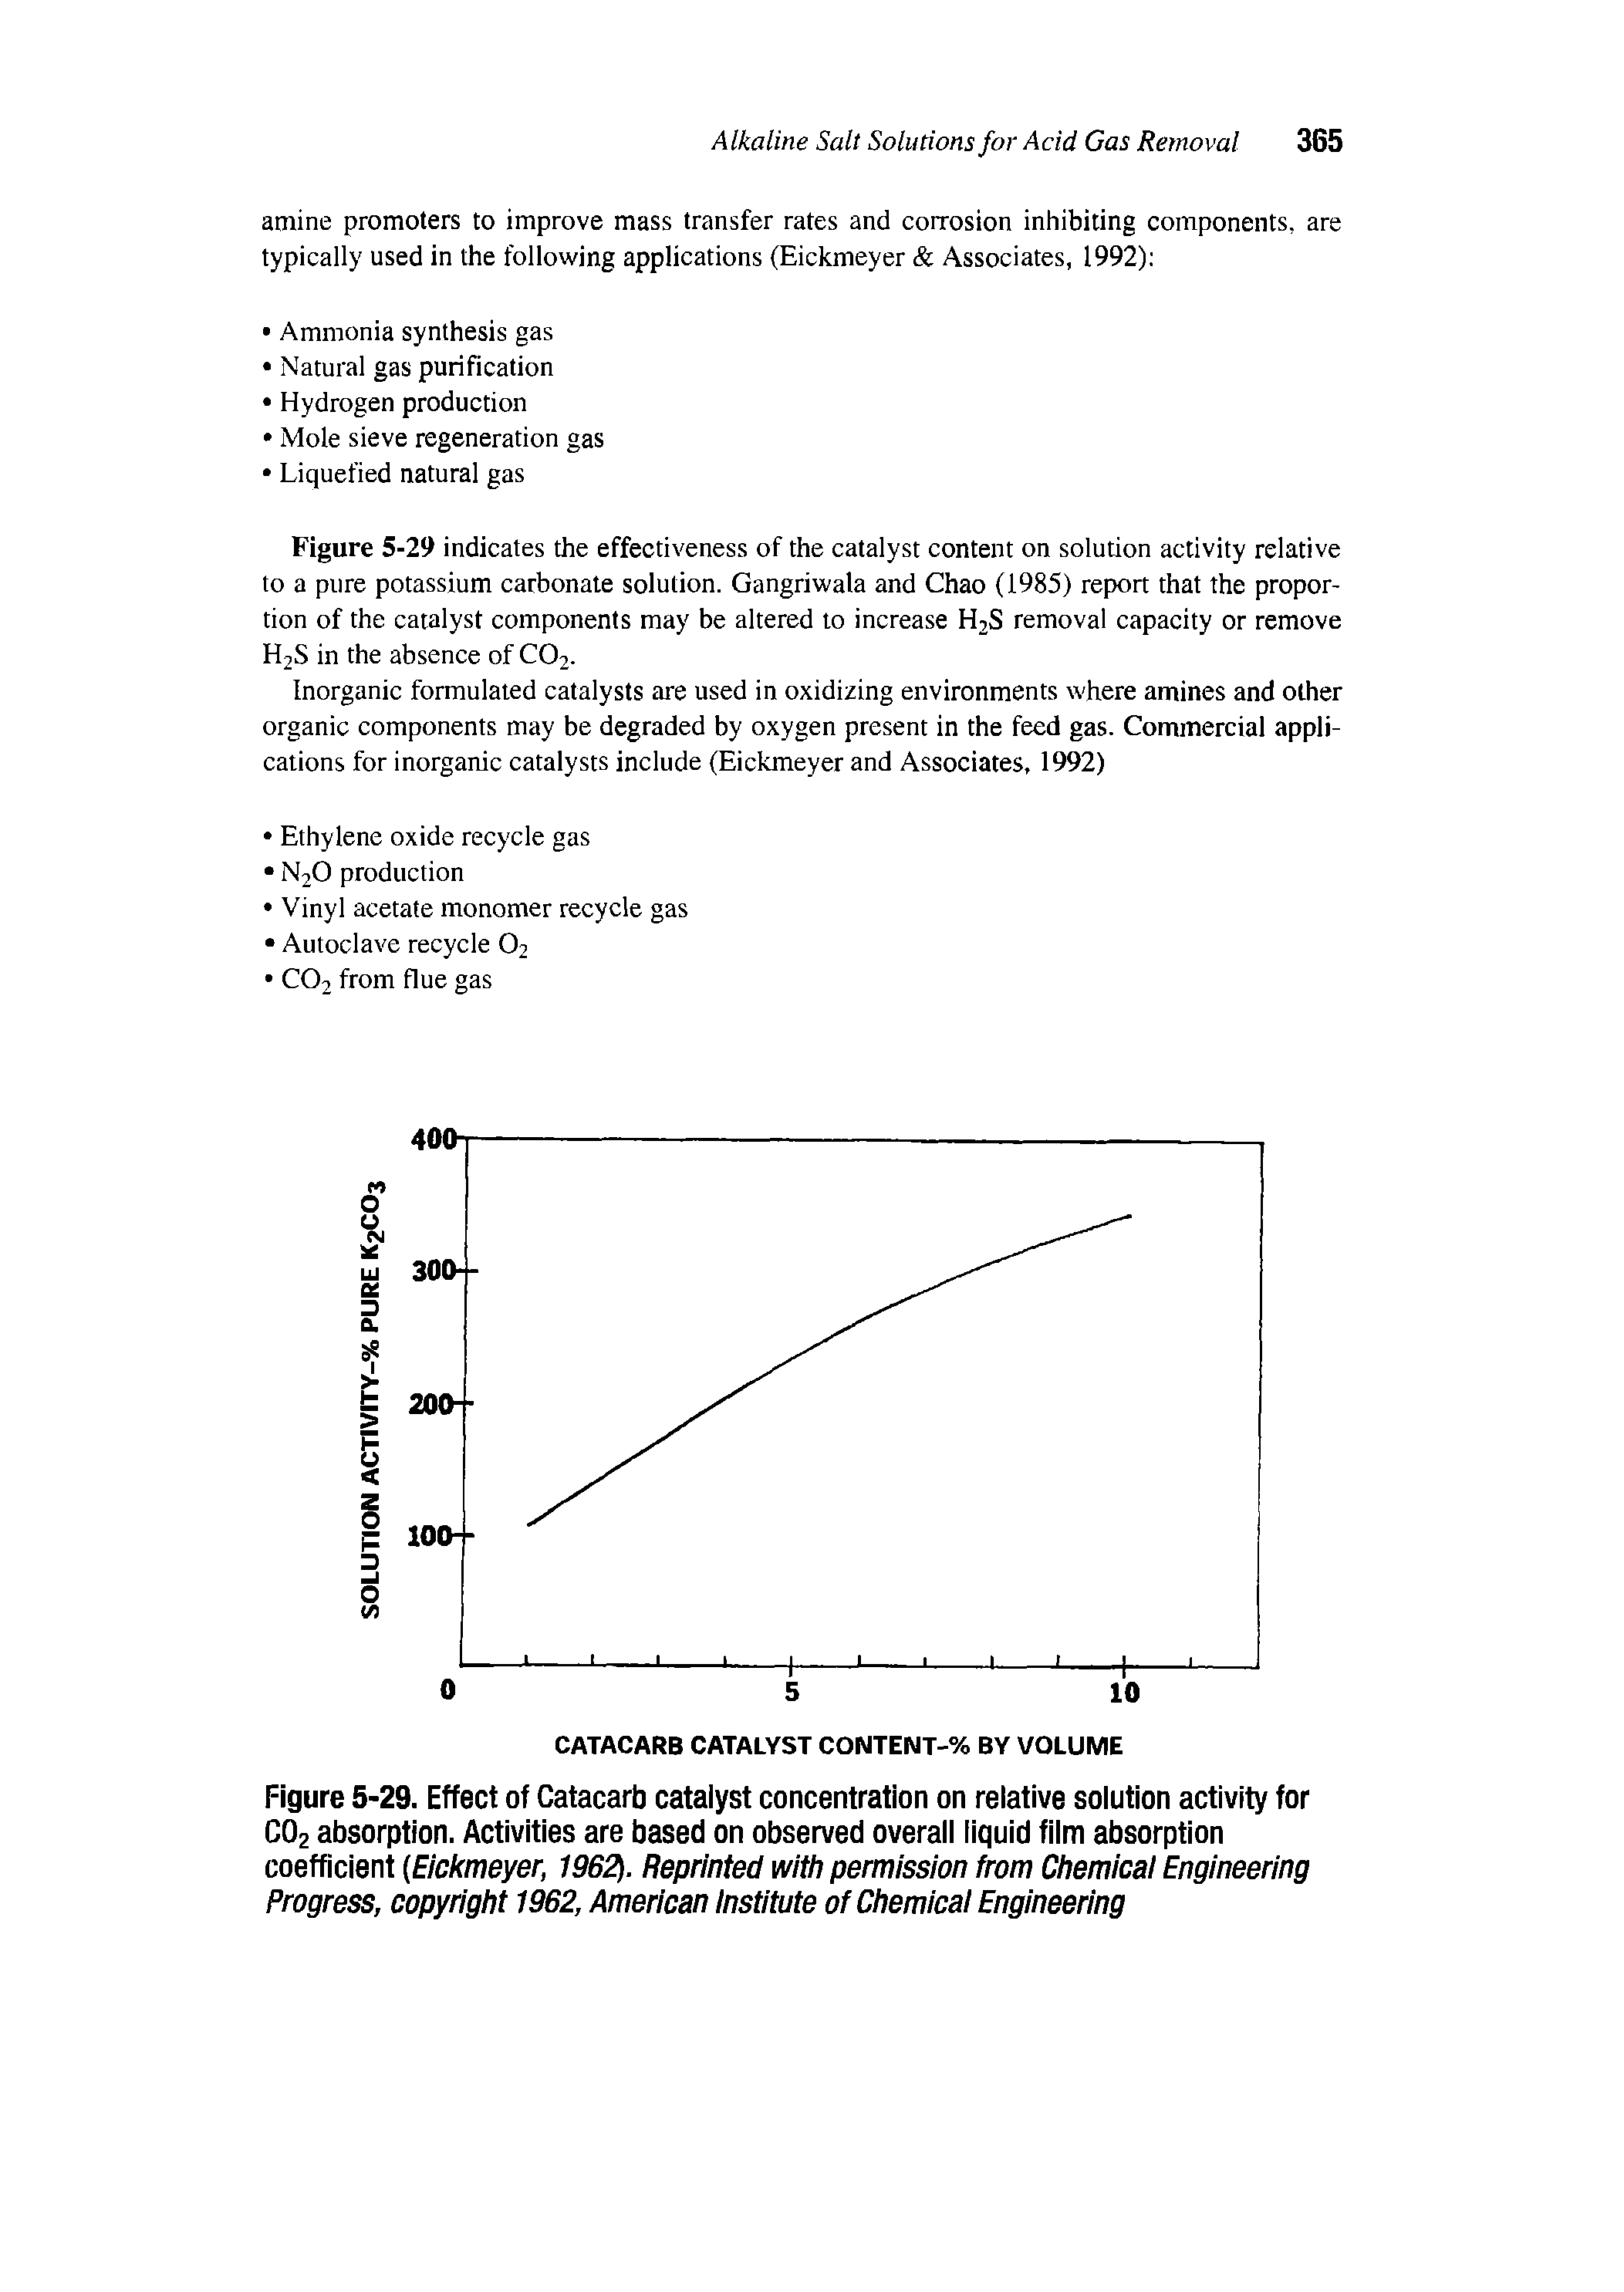 Figure 5-29. Effect of Catacarb catalyst concentration on relative solution activity for CO2 absorption. Activities are based on observed overall liquid film absorption coefficient [Eickmeyer, 1962j. Reprinted widi permission from Chemicai Engineering Progress, copyright 1962, American institute of Chemicai Engineering...